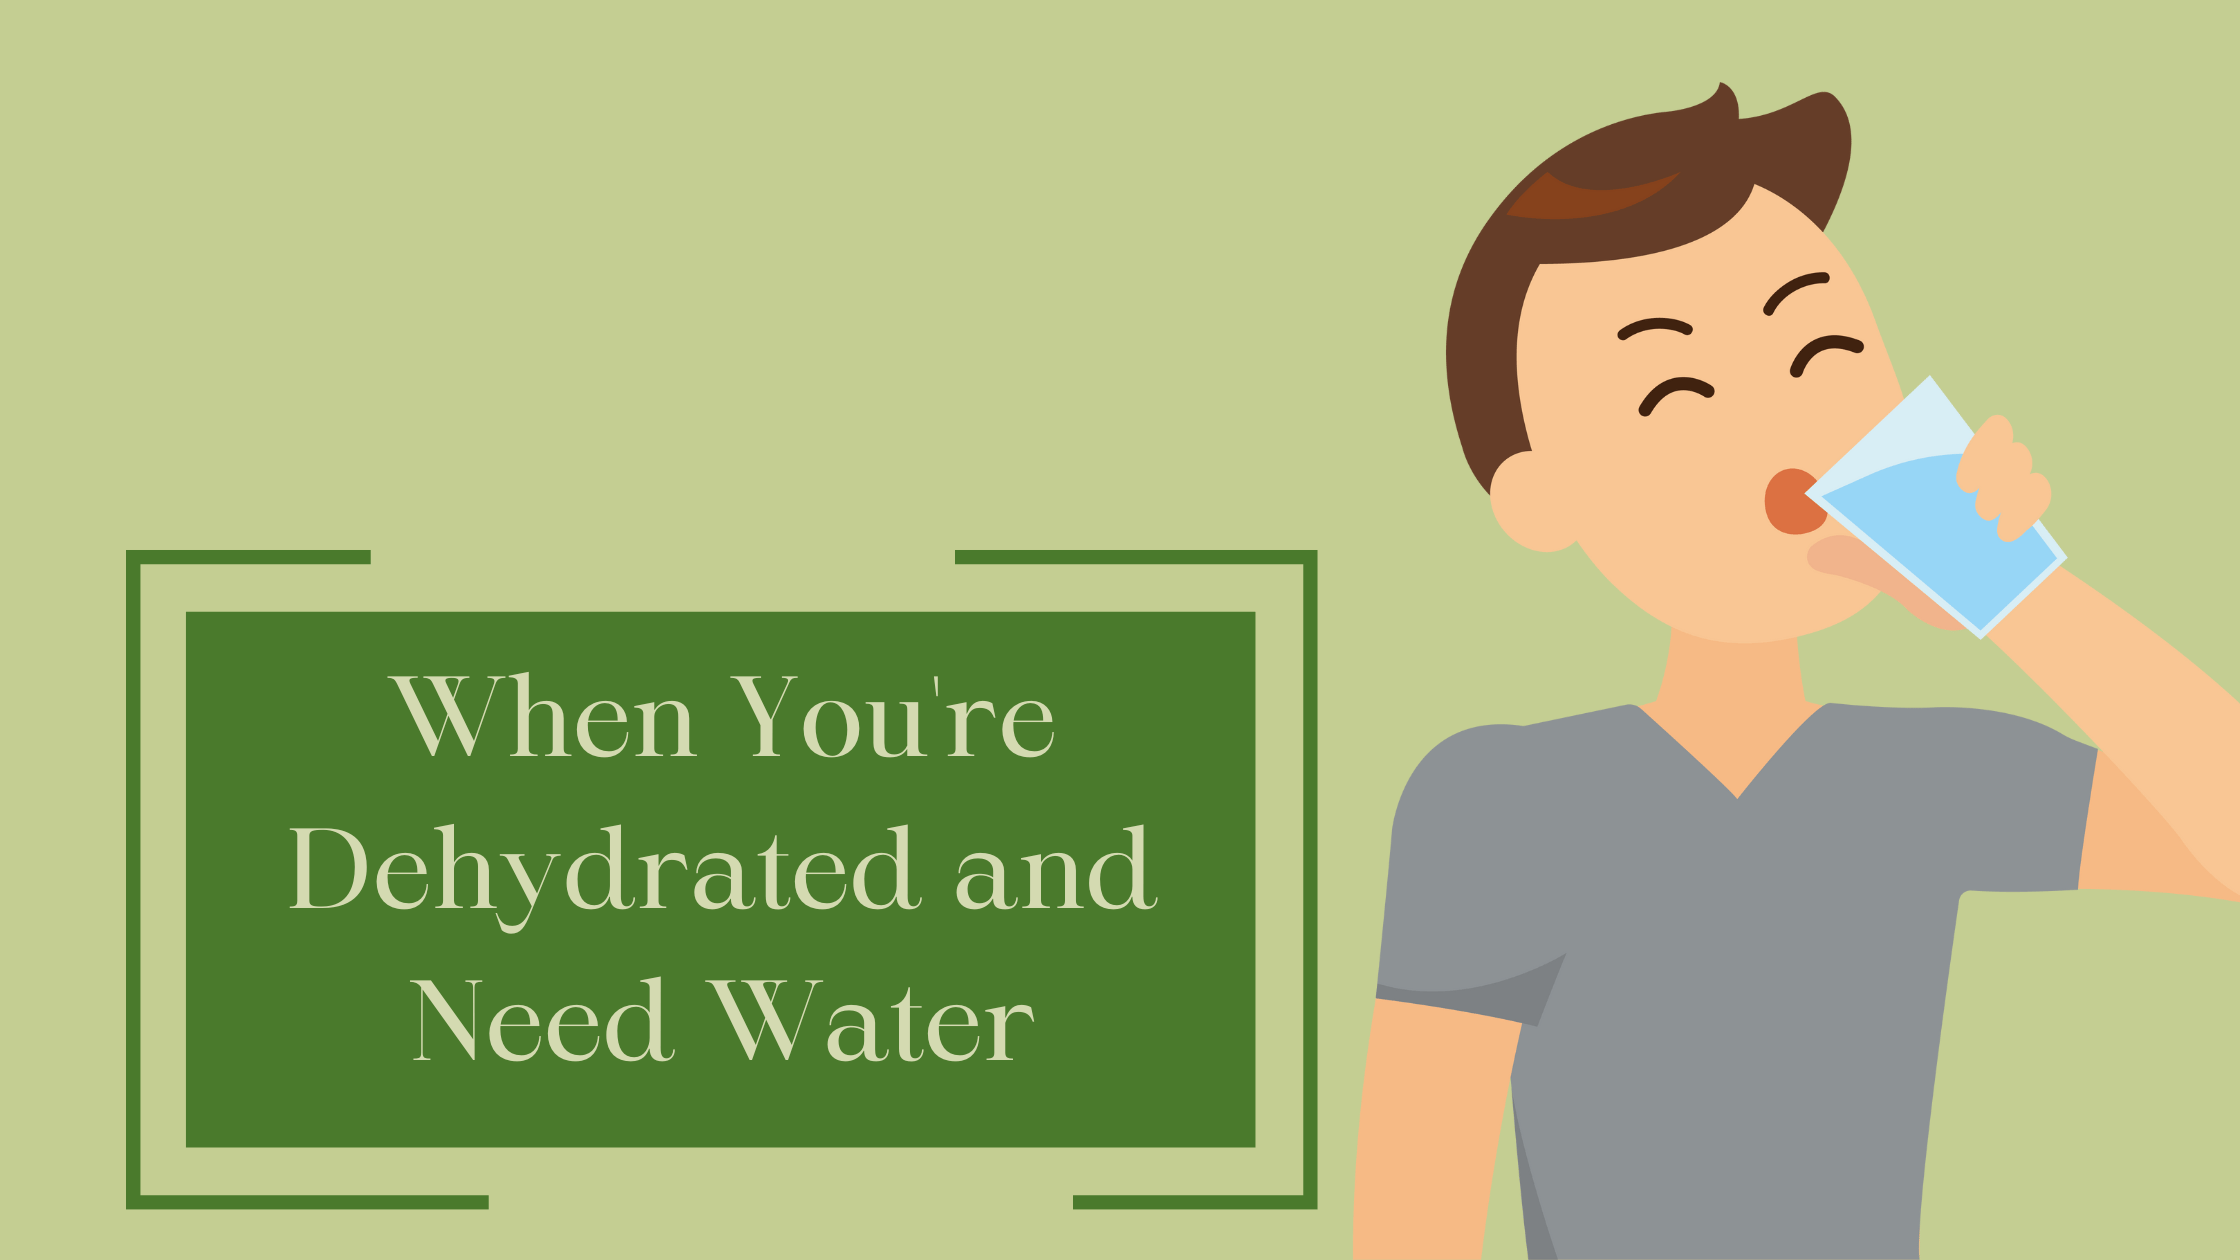 You're Dehydrated